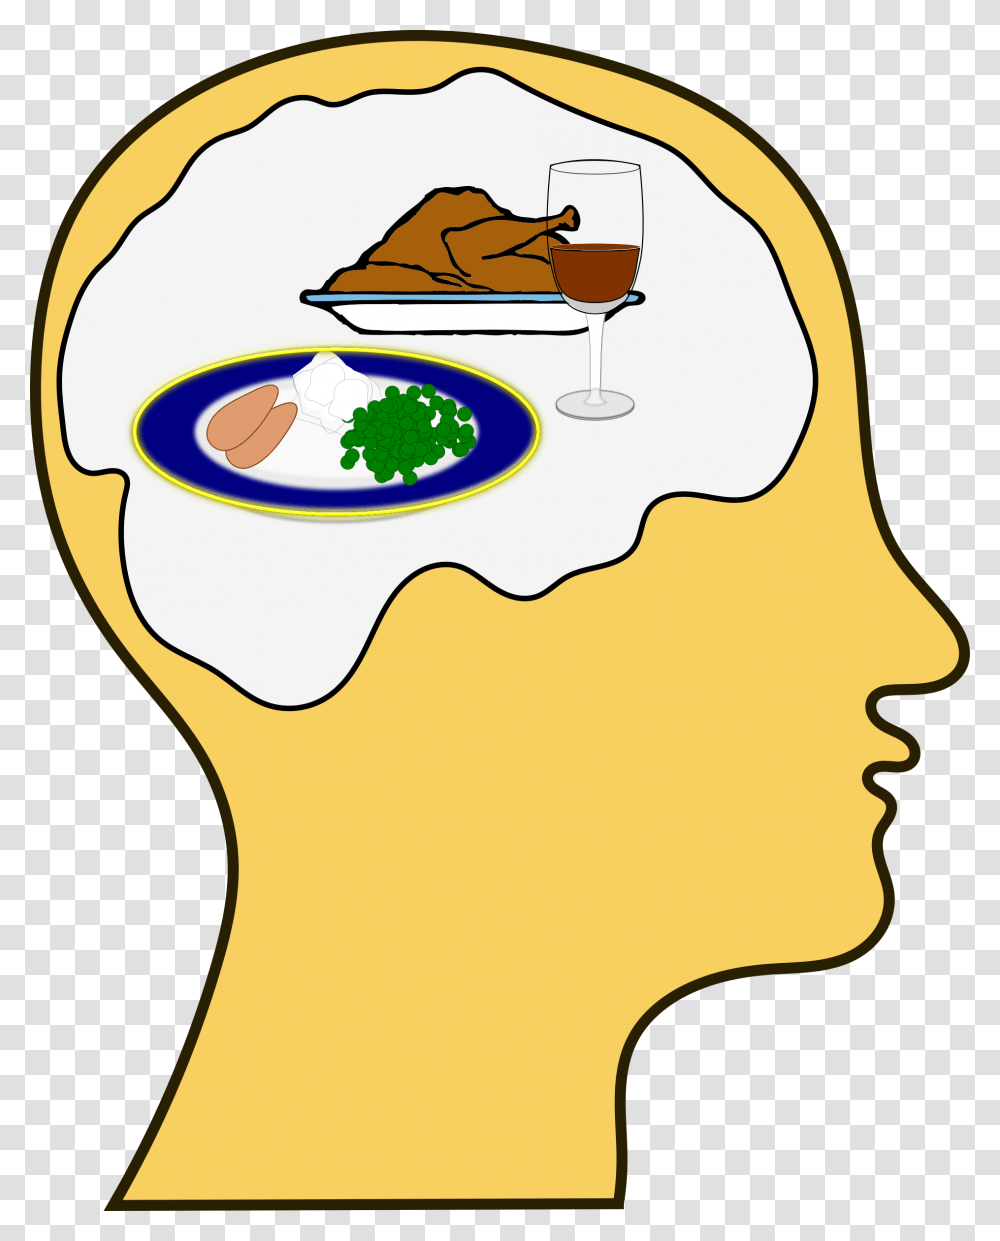 Thinking Of Big Image Thinking Of Food Clip Art, Label, Cushion, Sack Transparent Png